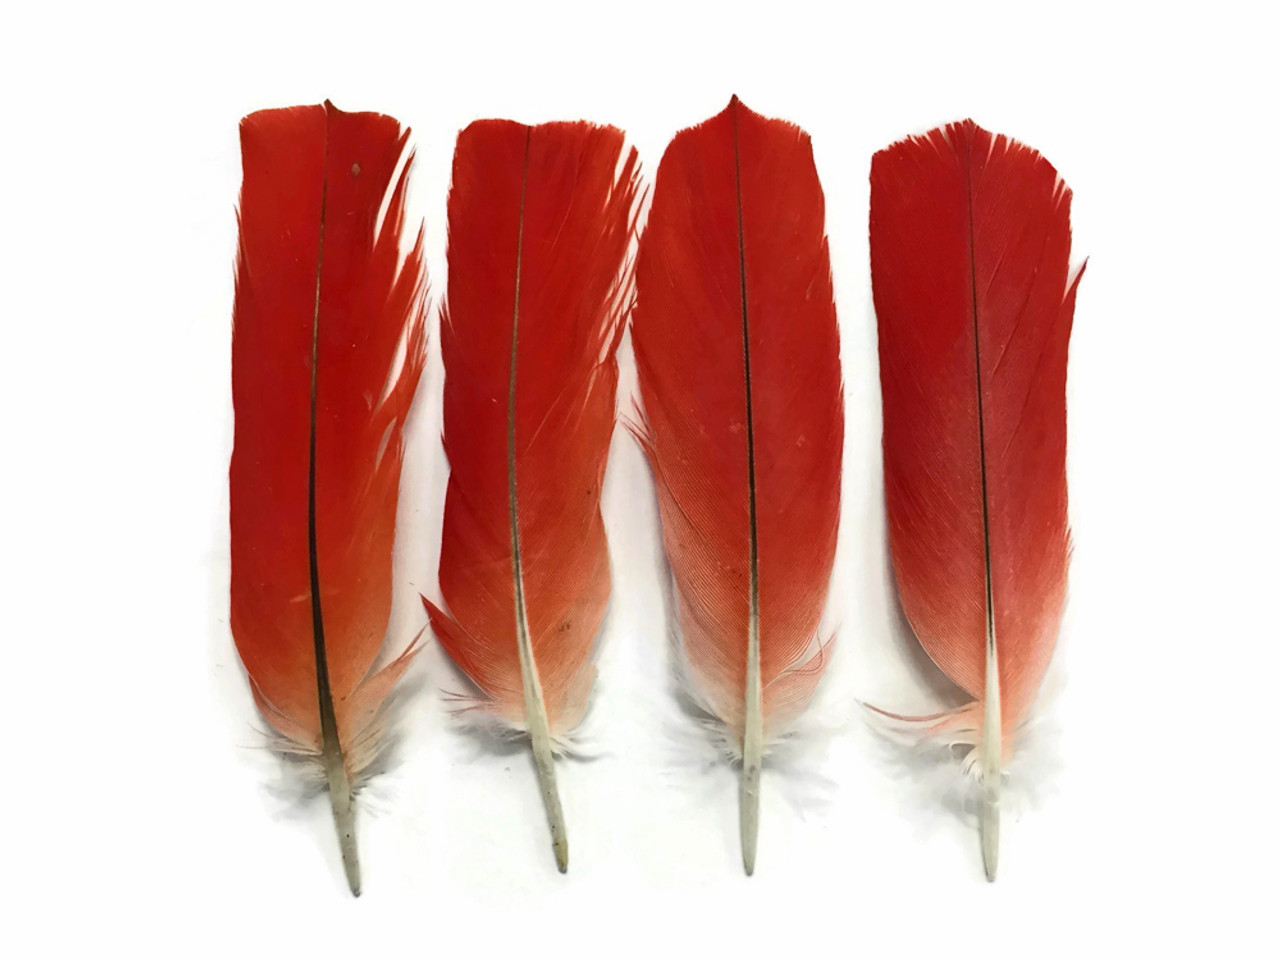 Red feathers Stock Photos, Royalty Free Red feathers Images